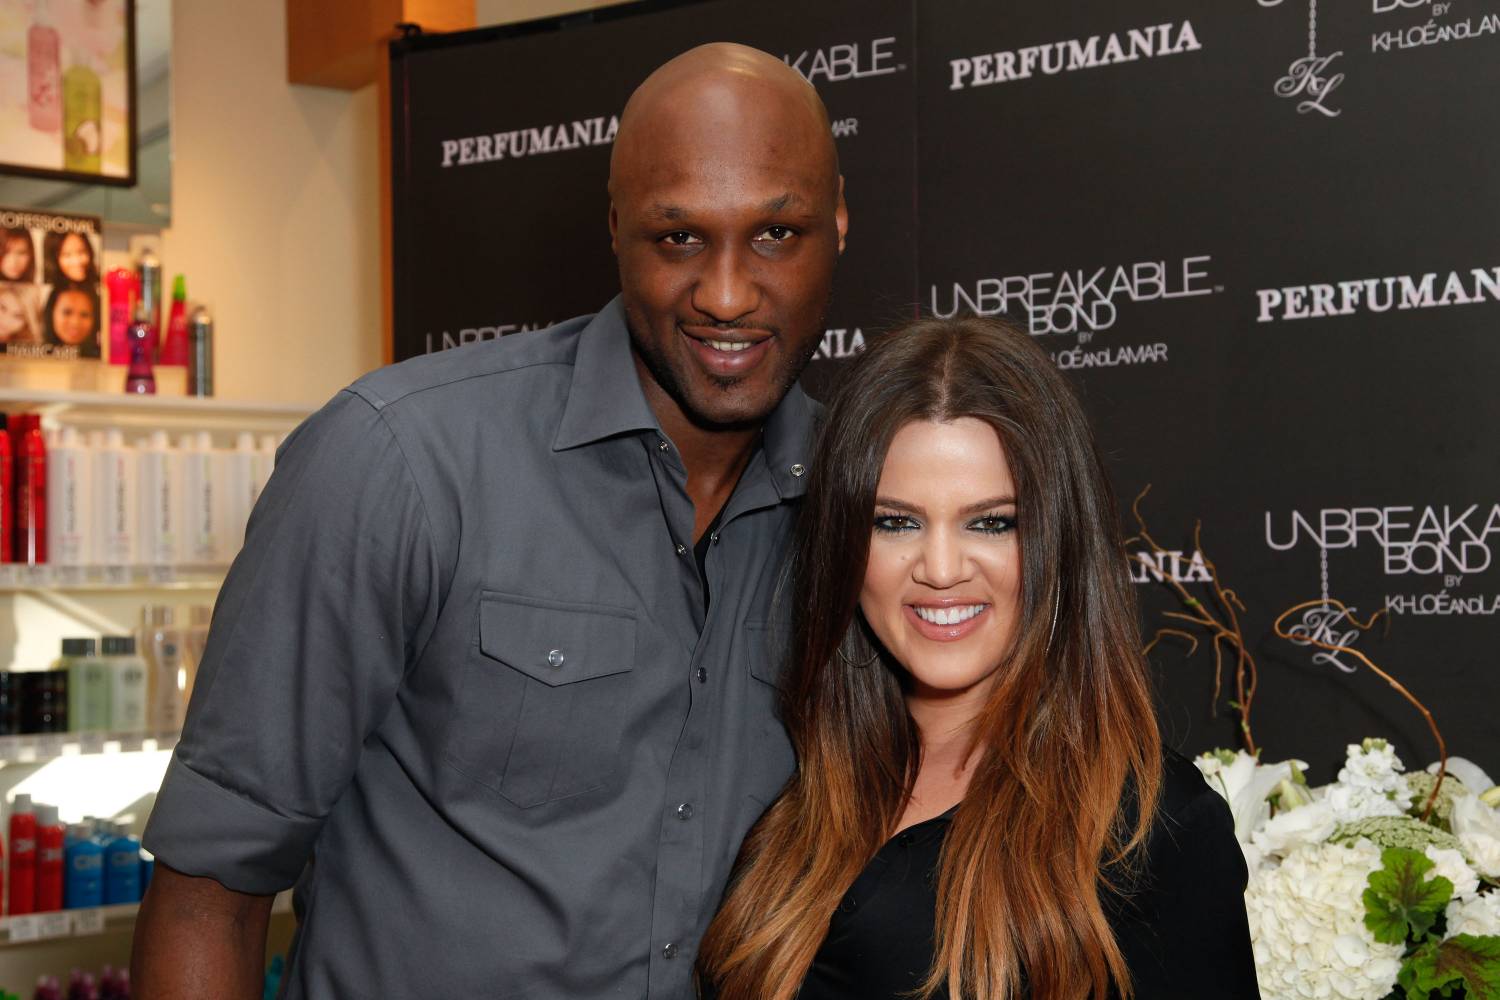 Professional basketball player Lamar Odom and TV personality Khloe Kardashian make an appearance to promote their fragrance, 'Unbreakable Bond,' at Perfumania on June 7, 2012 in Orange, California.